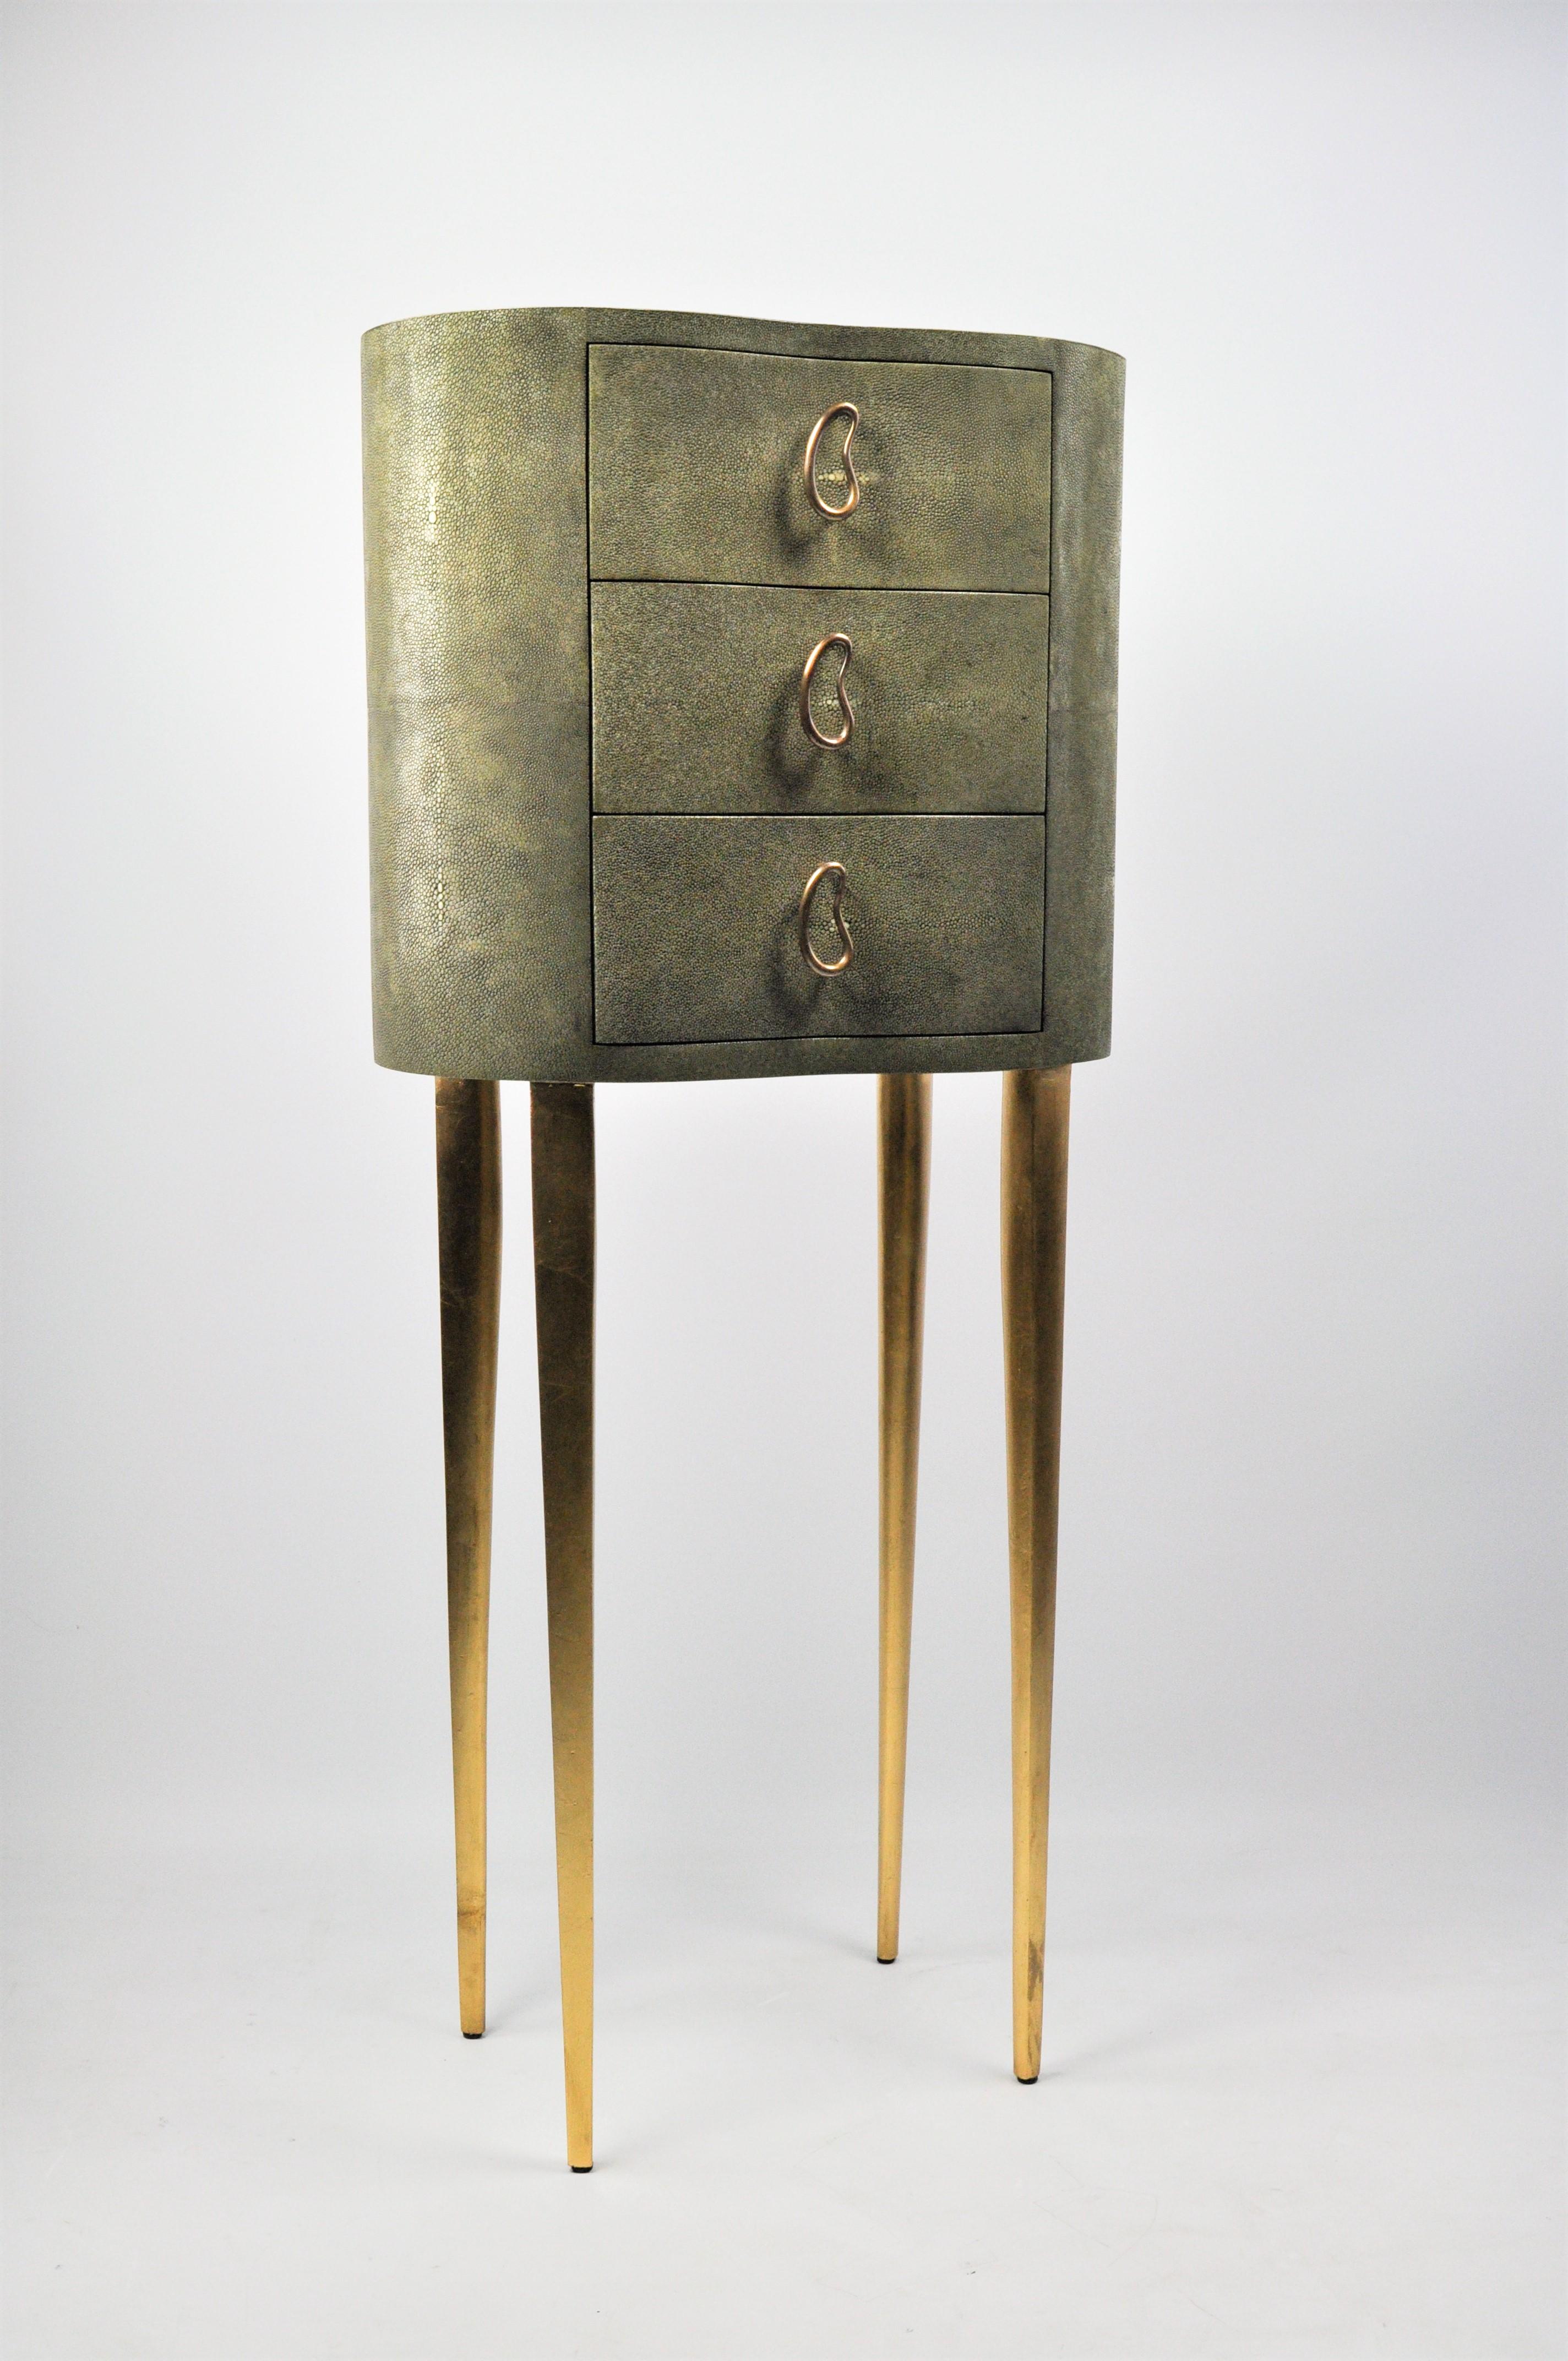 The Stelar cabinet is made of shagreen (our ref OLIVE).
It has an organic shape and 3 drawers with lost wax brass handles.
The feet are gilded with a powder gold leaf.

This piece can take place in your entrance or your living room. Add this